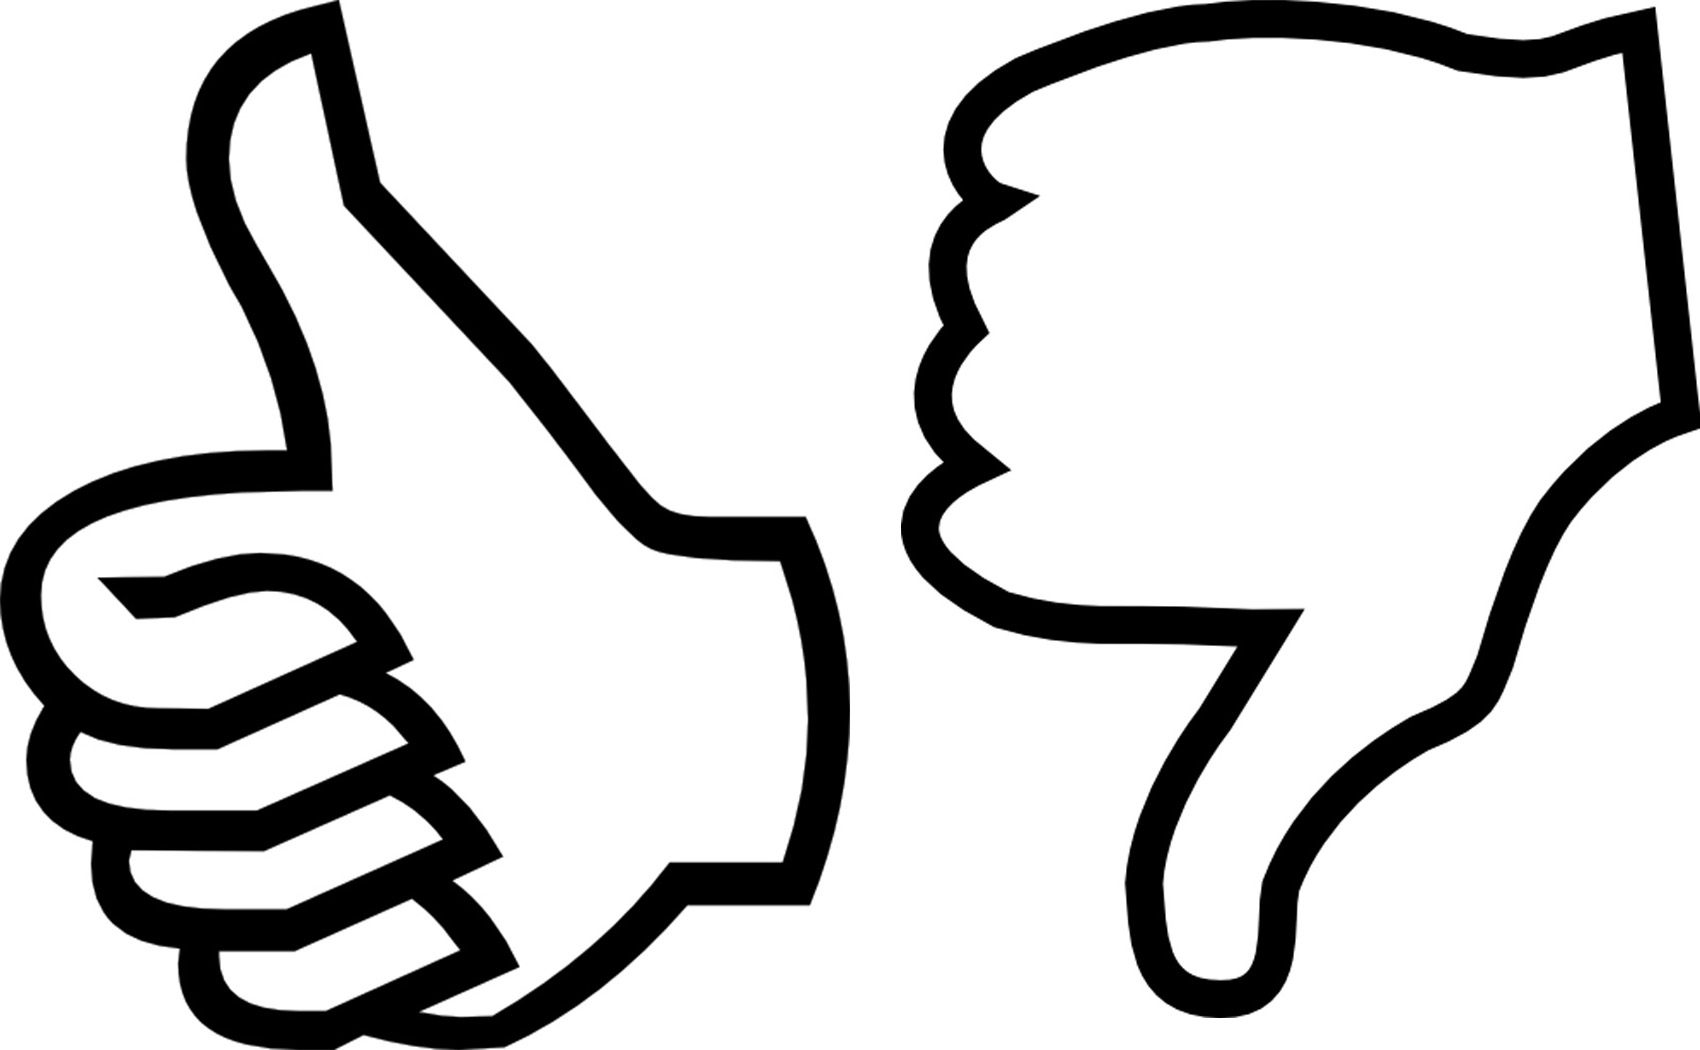 Thumbs up thumbs down clipart 